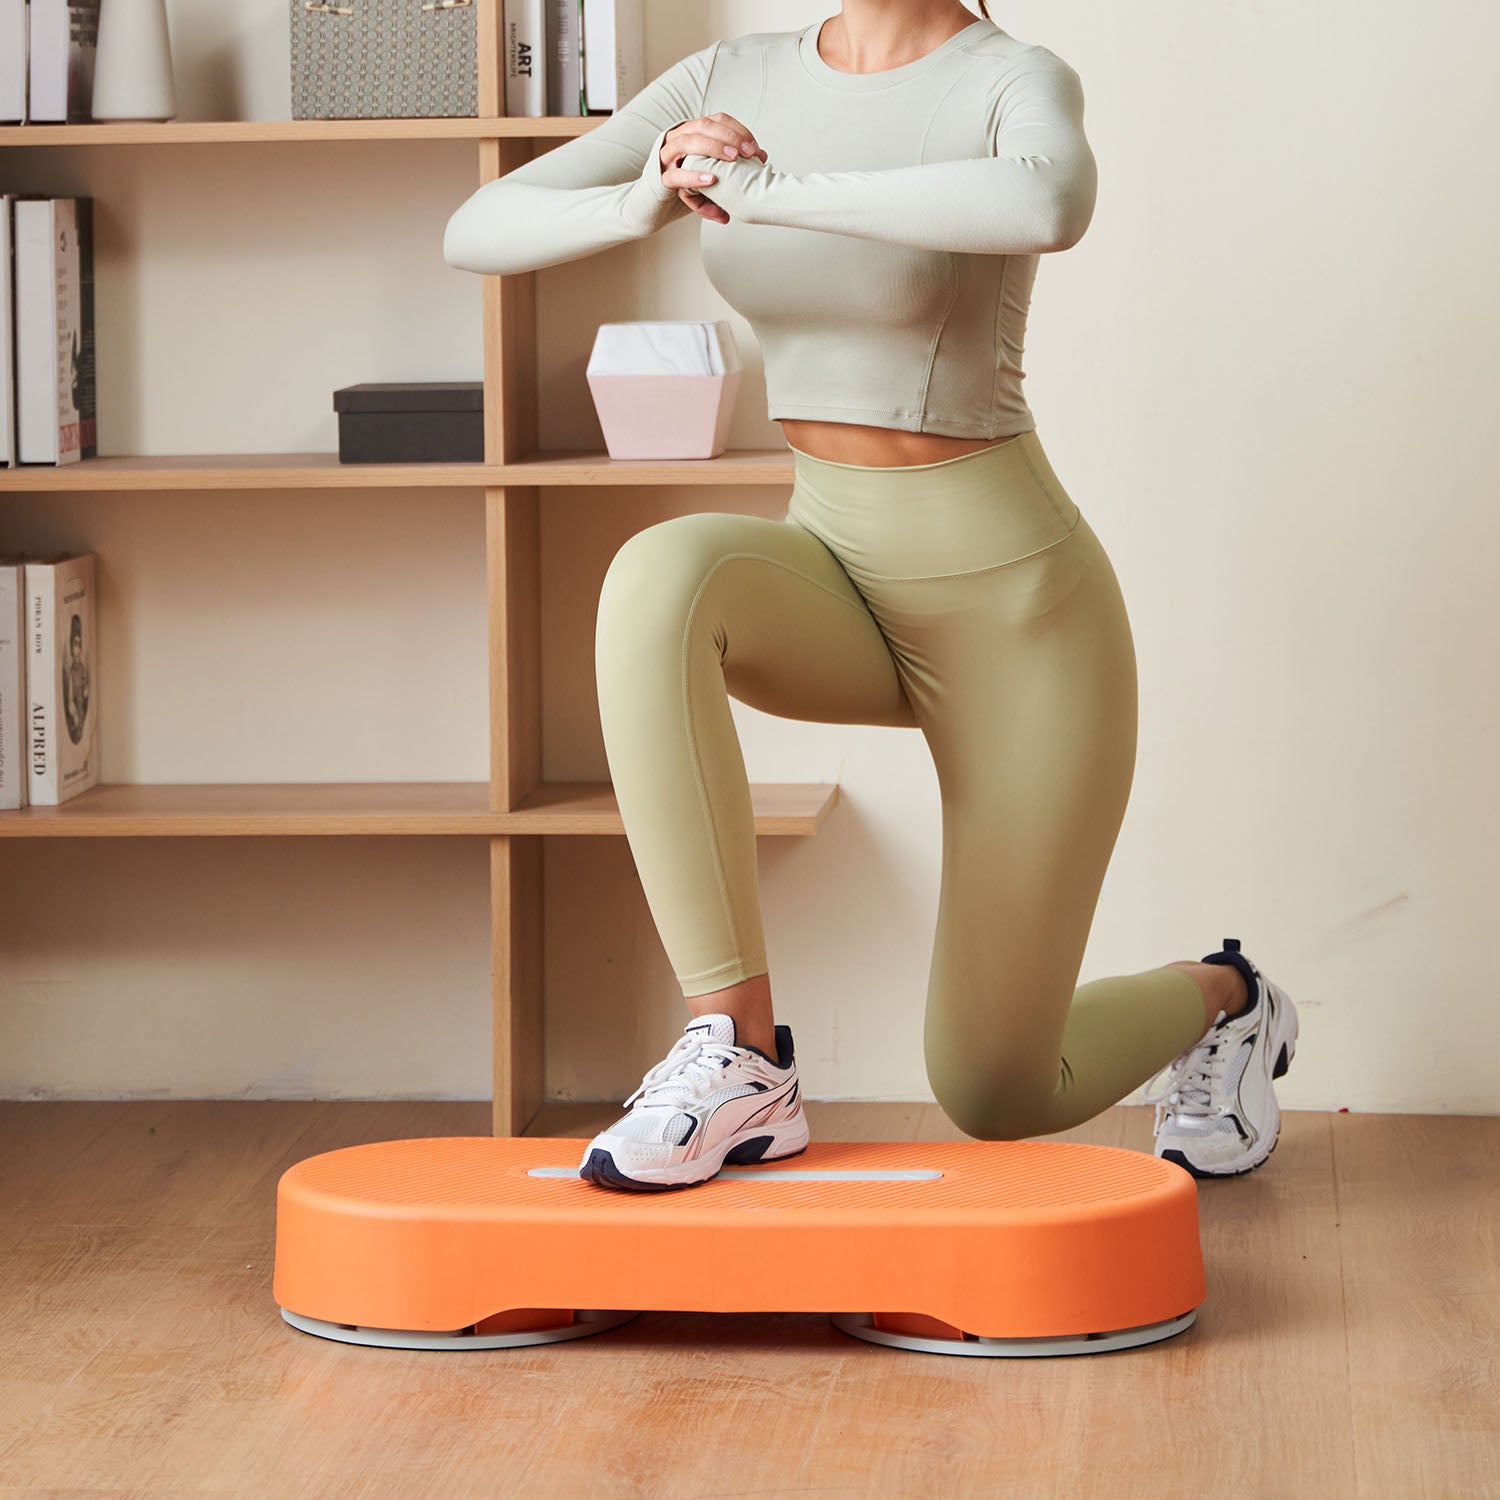 Reaching New Heights of Fitness: Exploring the Adjustable Aerobic Exercise Stepper